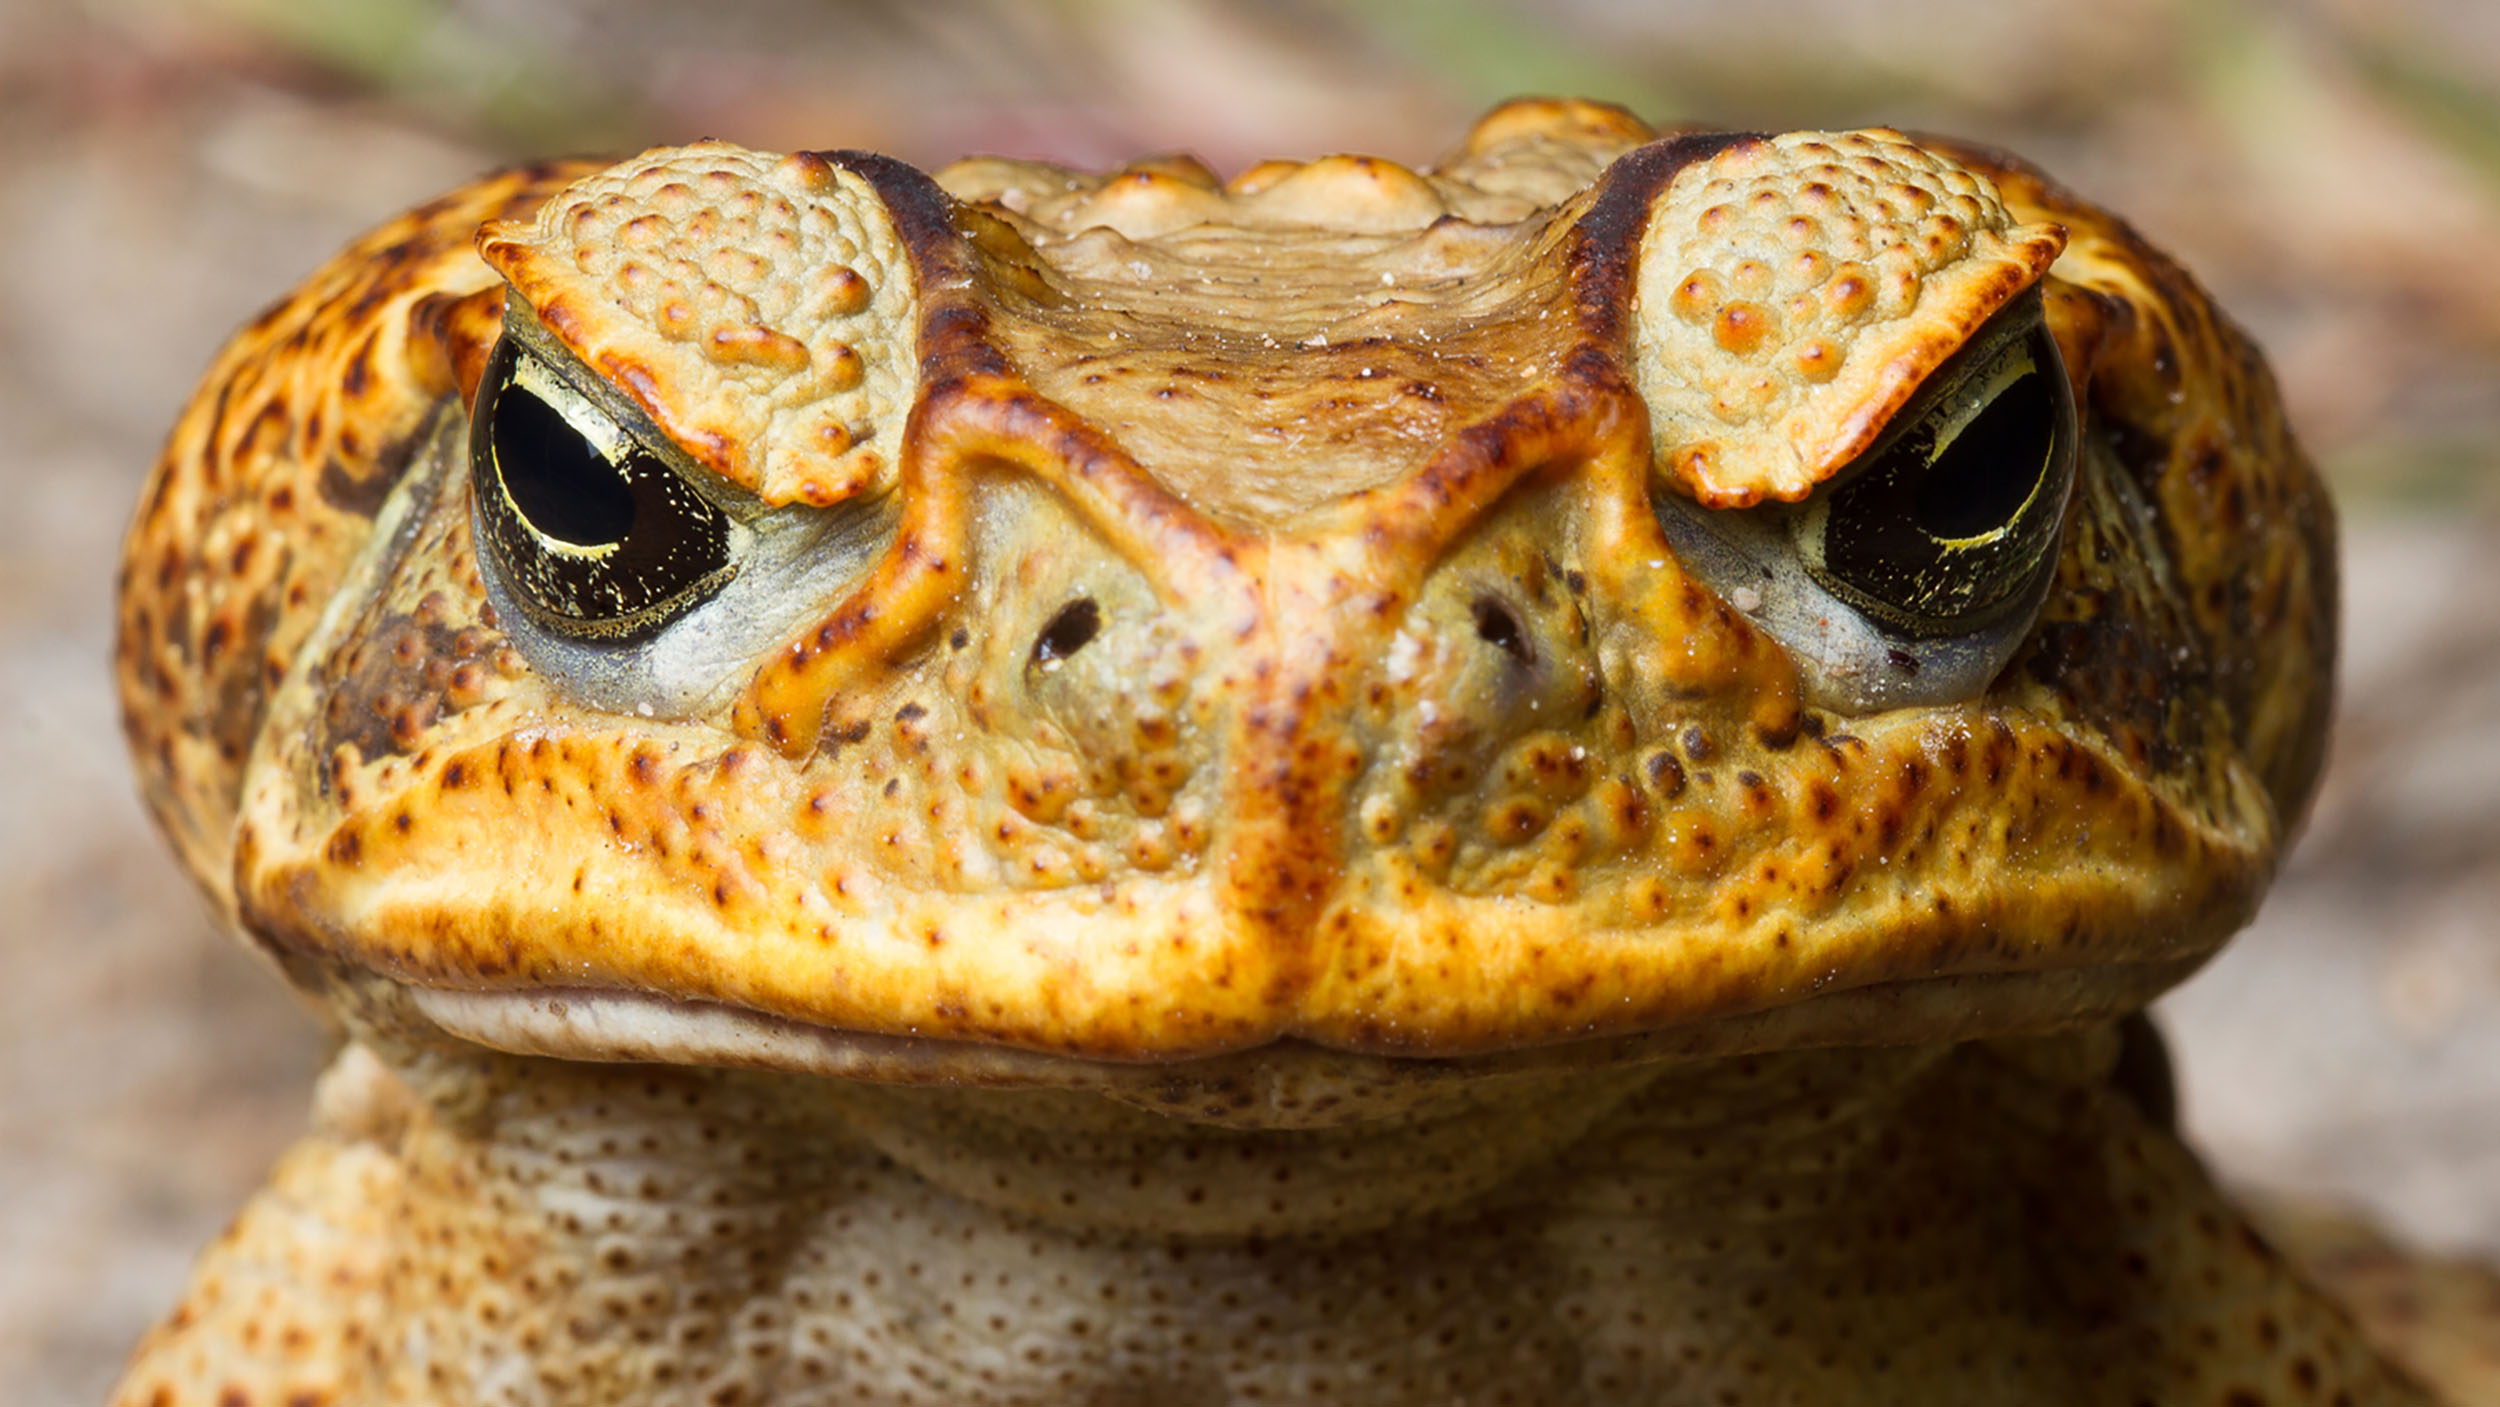 Many invasive pest animals cause significant damage to the nature of the Outback. Cane toads were introduced from central America in an attempt to control pests in sugar cane crops. However, they poison many native predators, such as quolls and goannas, which eat them.